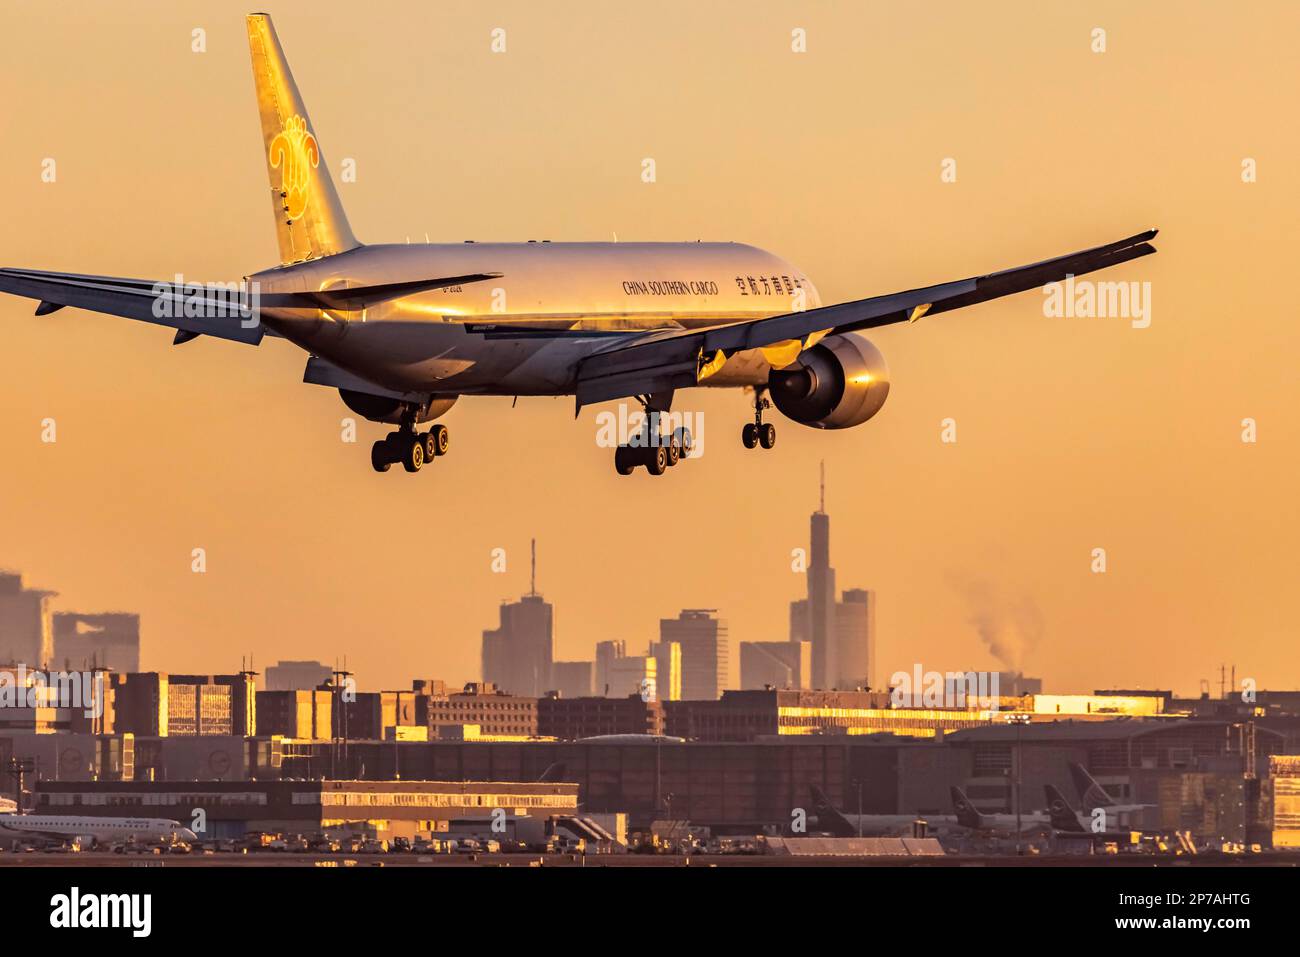 Fraport Airport with skyline in the early morning, cargo aircraft of the type Boeing 777F of the airline China Southern Airlines, on approach Stock Photo